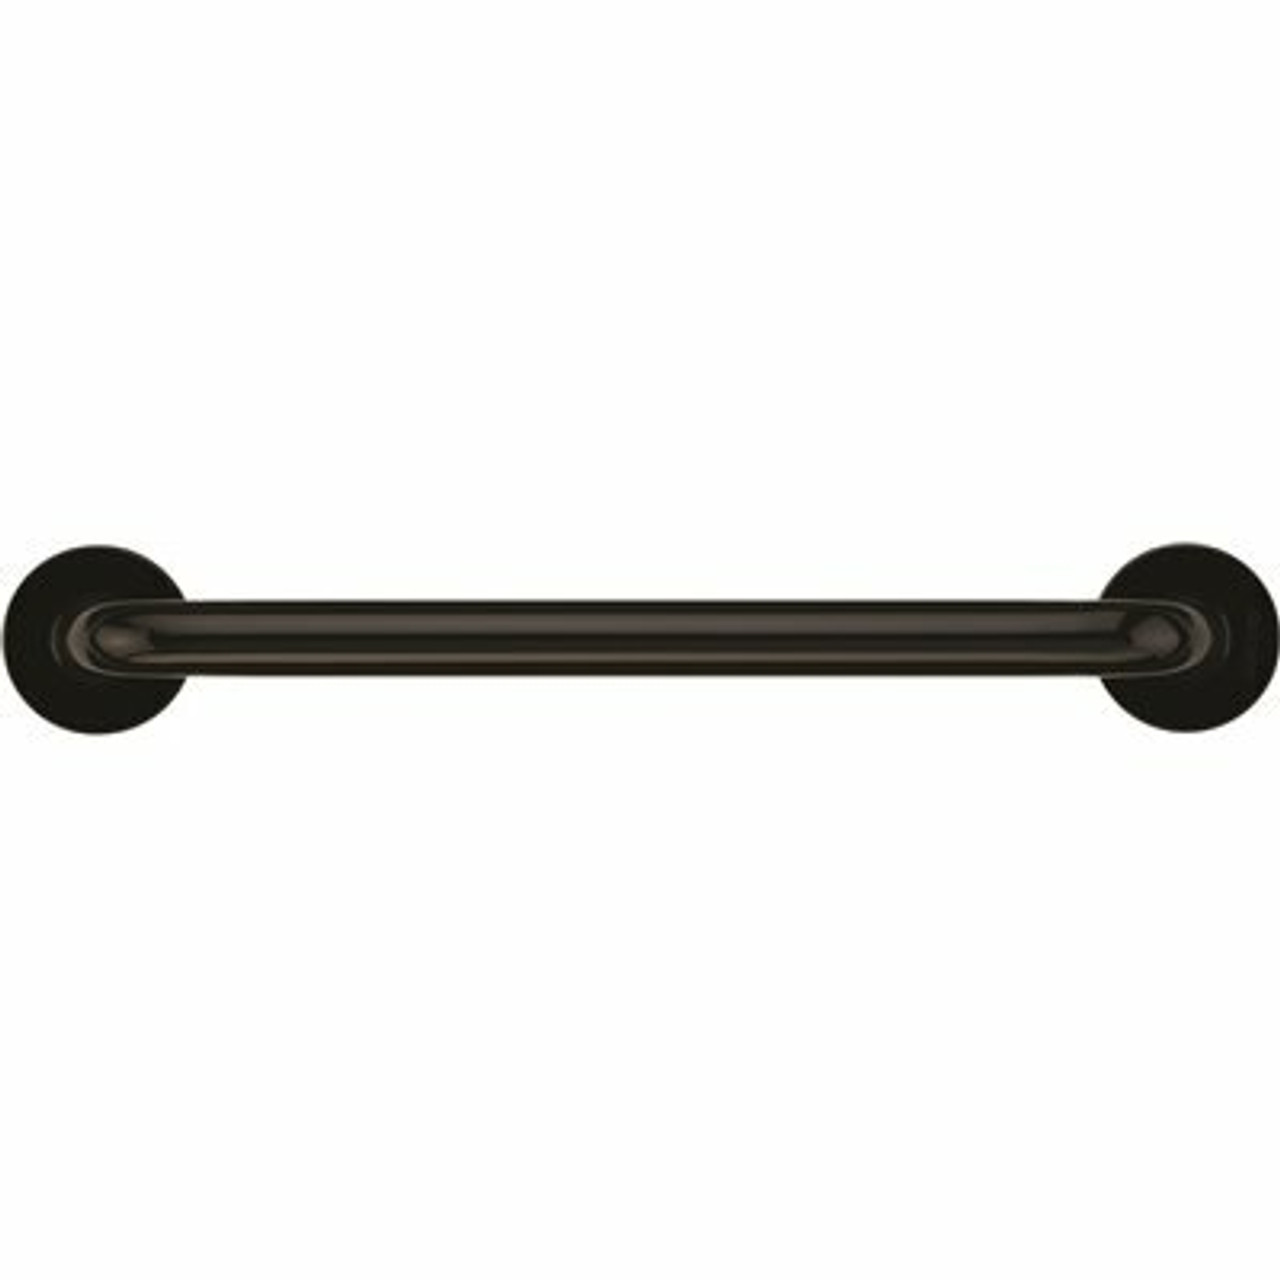 Ponte Giulio Usa 24 In. Contractor Antimicrobial Vinyl Coated Grab Bar In Black